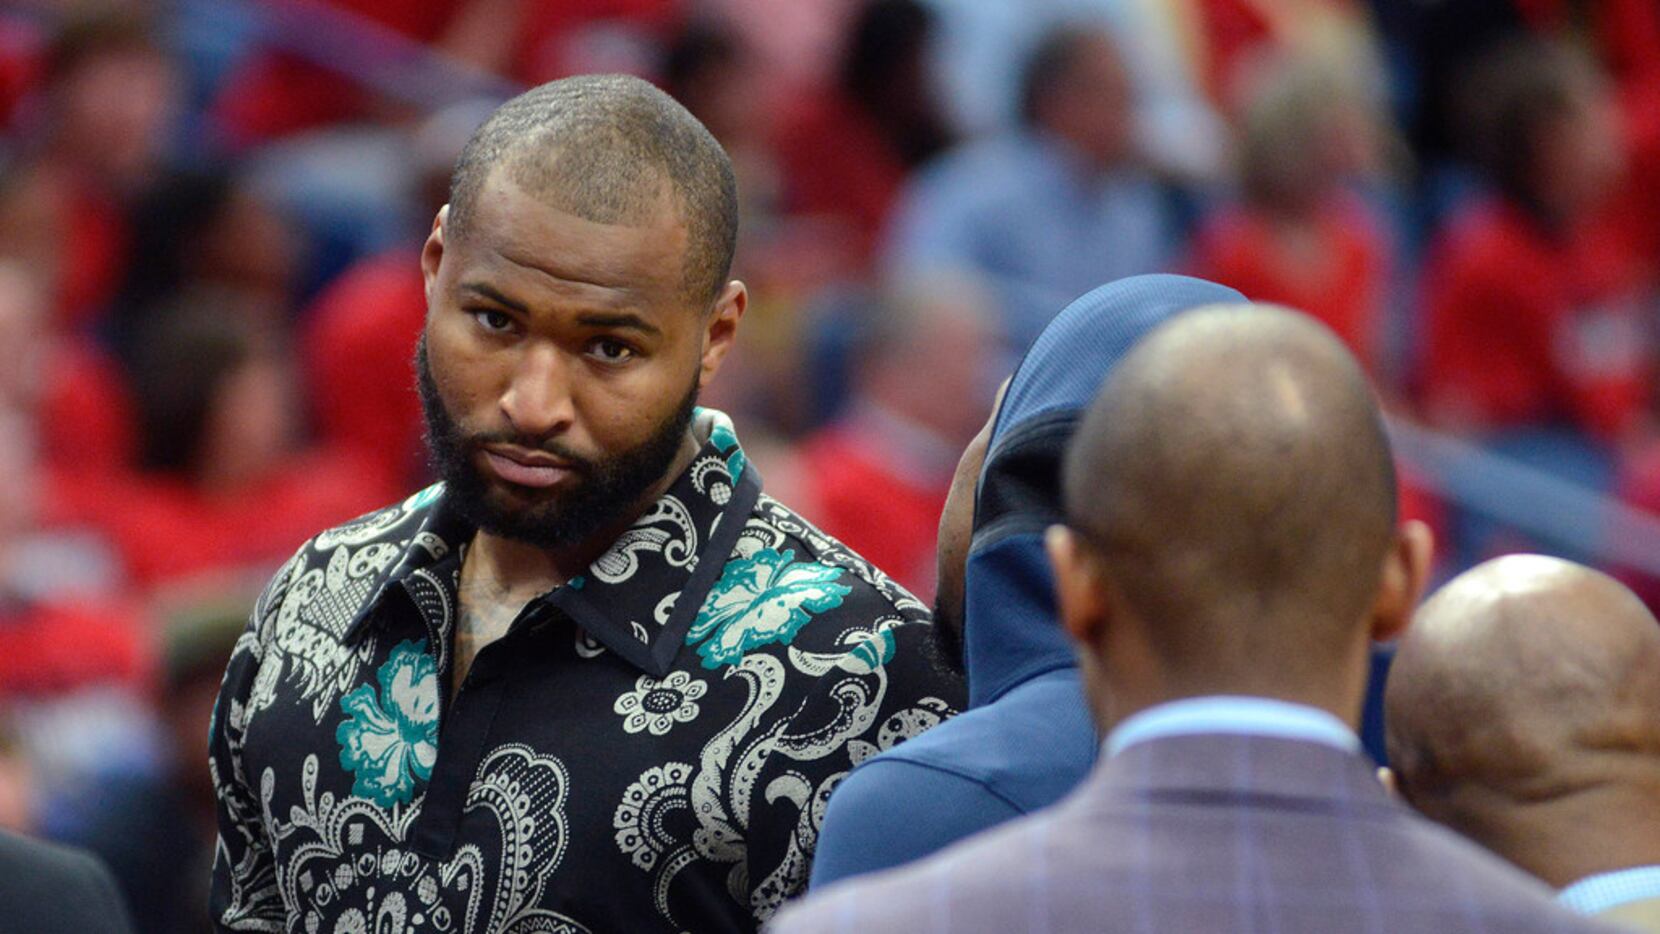 New Orleans Pelicans center DeMarcus Cousins walks on the court in street clothes during the...